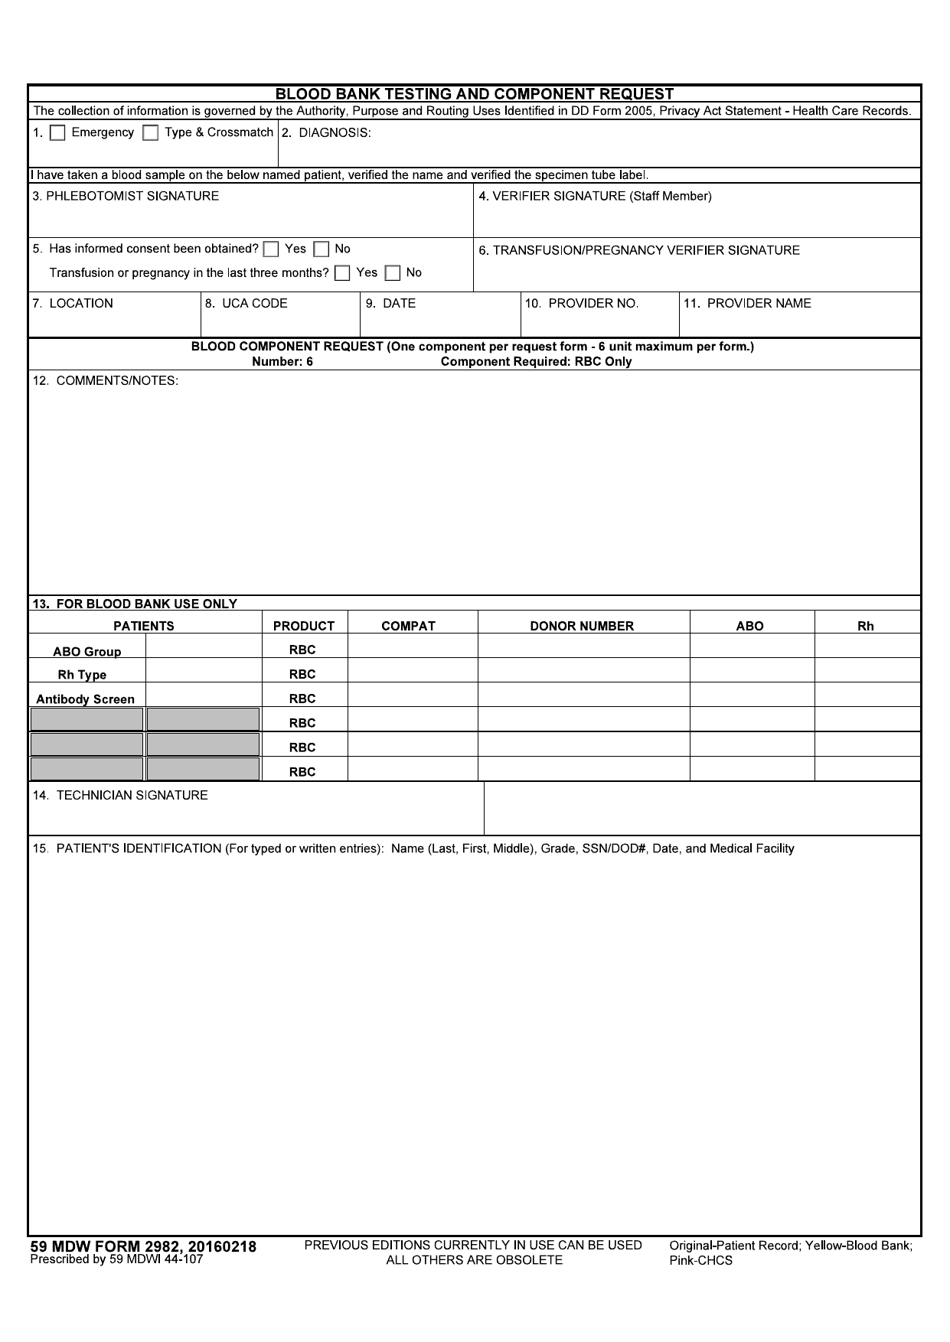 59 MDW Form 2982 Blood Bank Testing and Component Request, Page 1